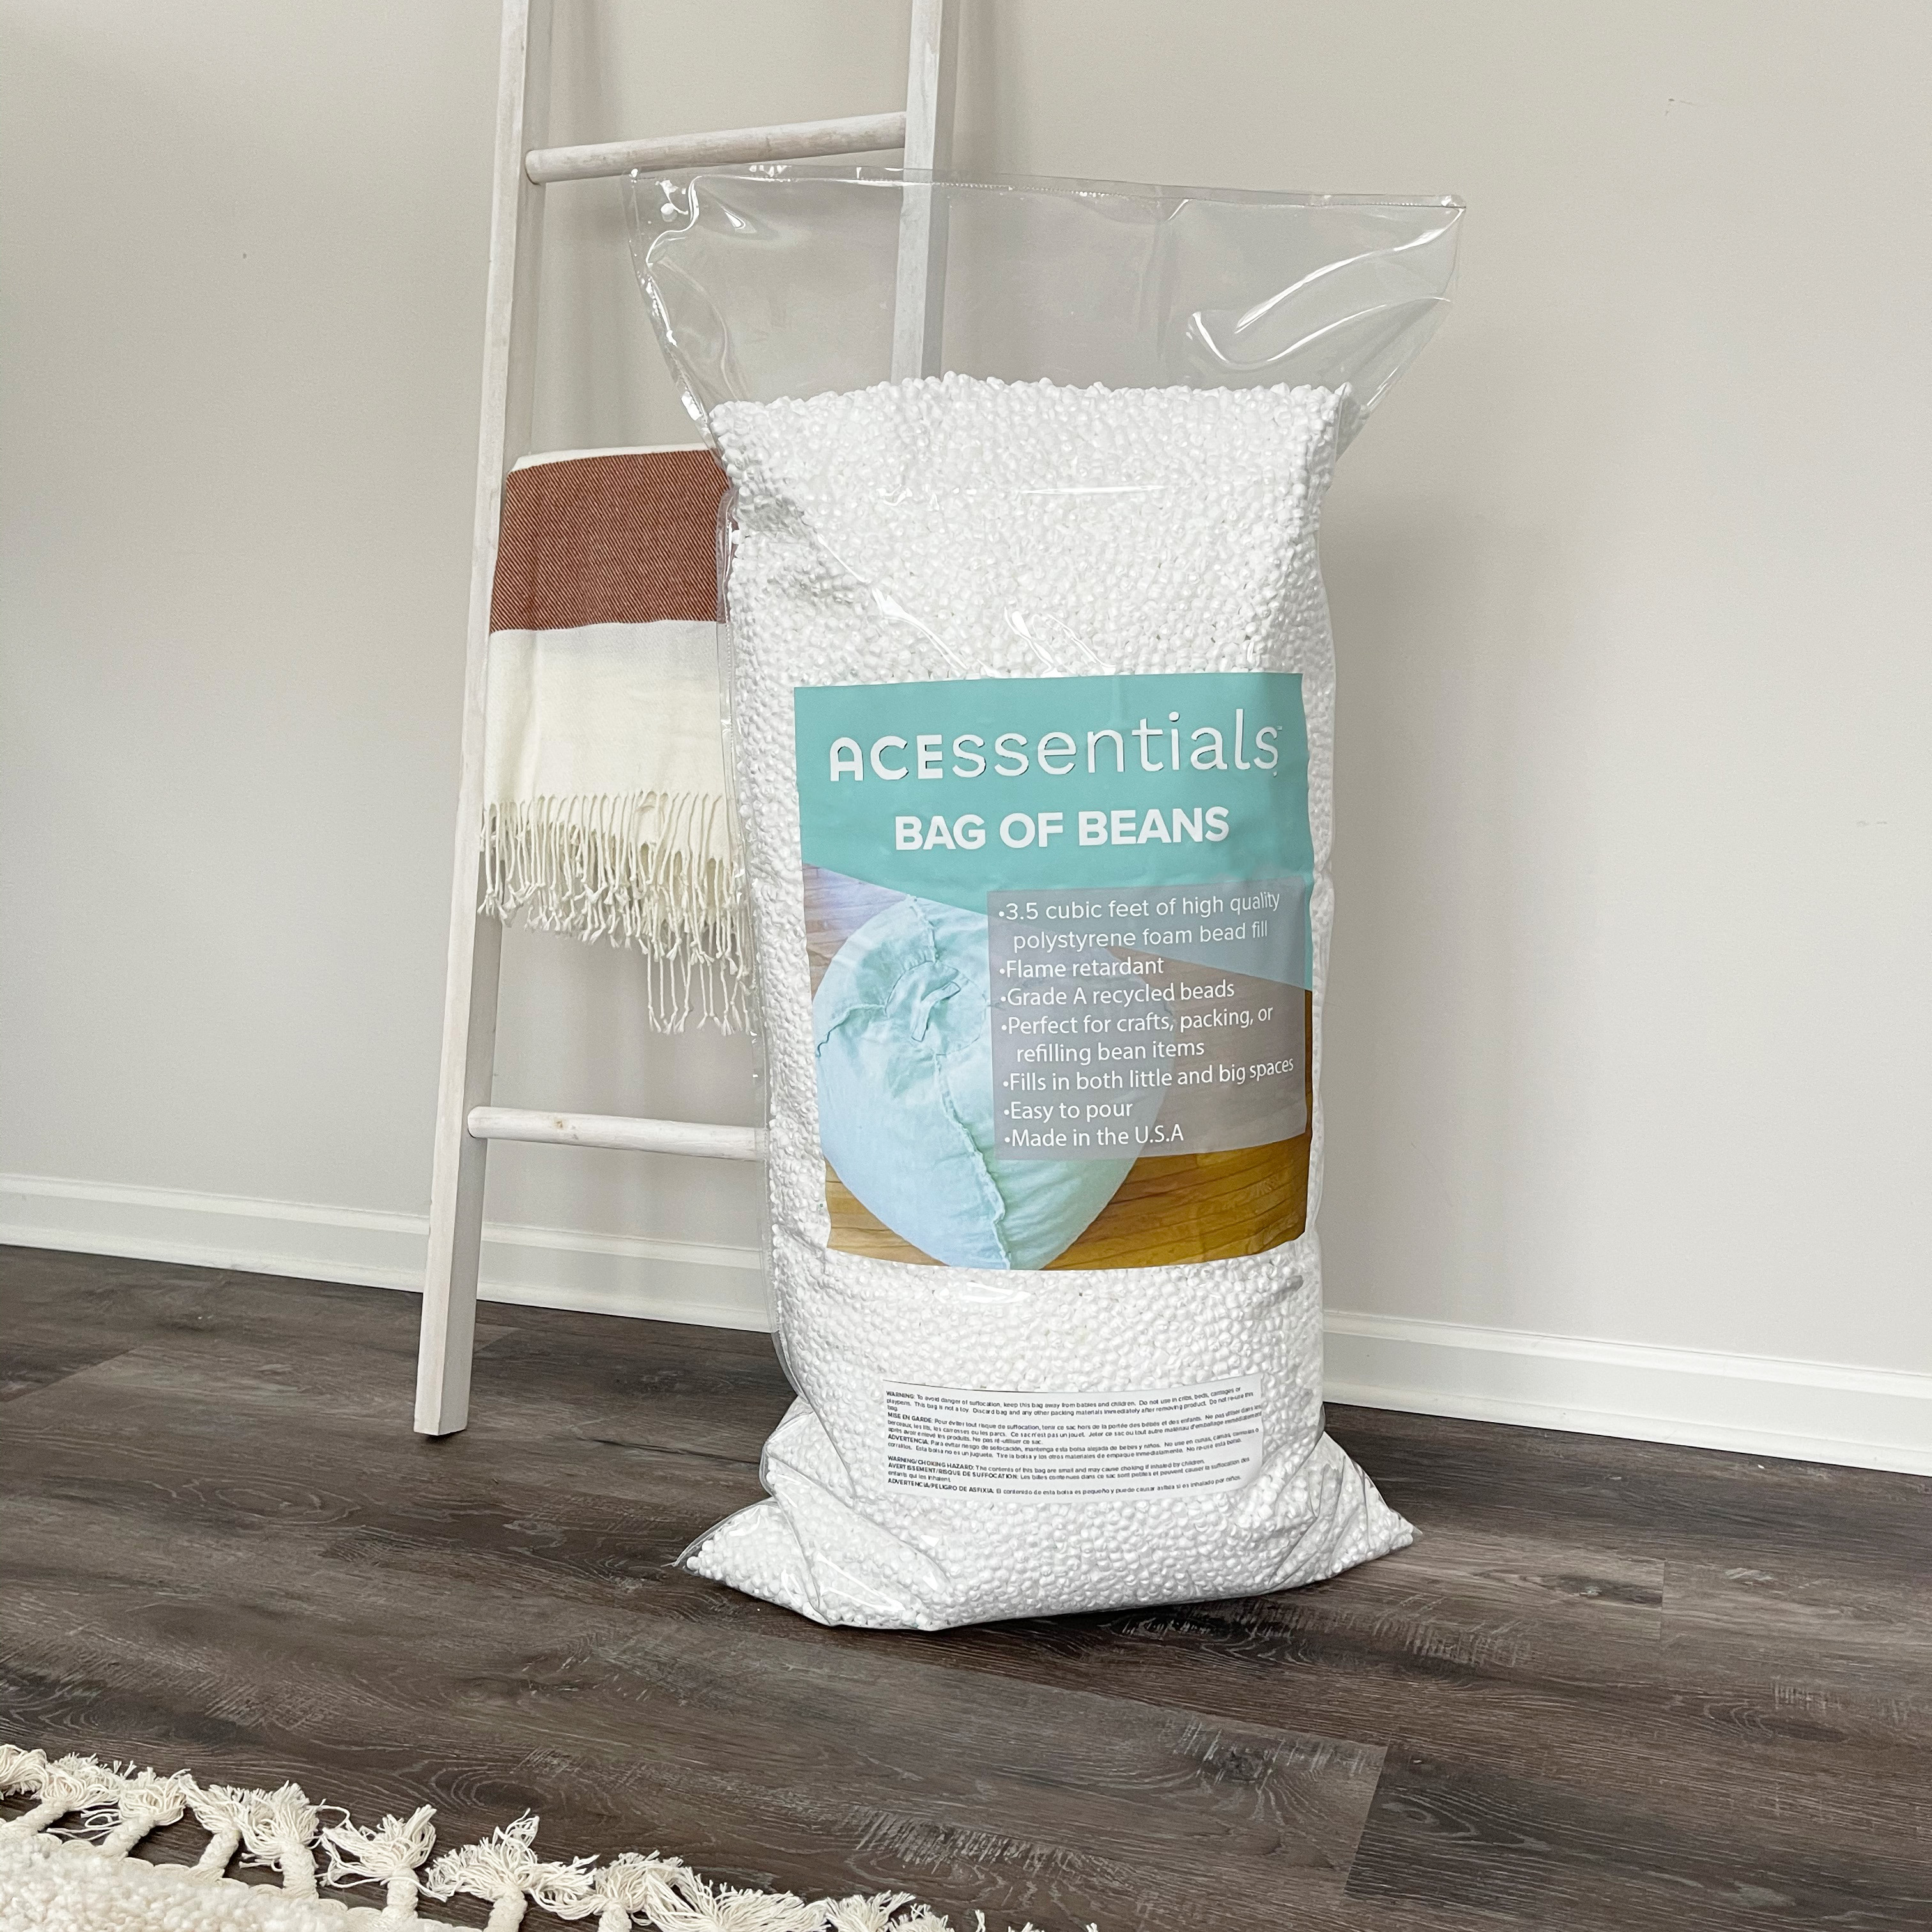 ACEssentials Polystyrene Bean Refill for Crafts and Filler for Bean Bag Chairs, 100 Liters, 3.5 Cubic feet - image 1 of 6